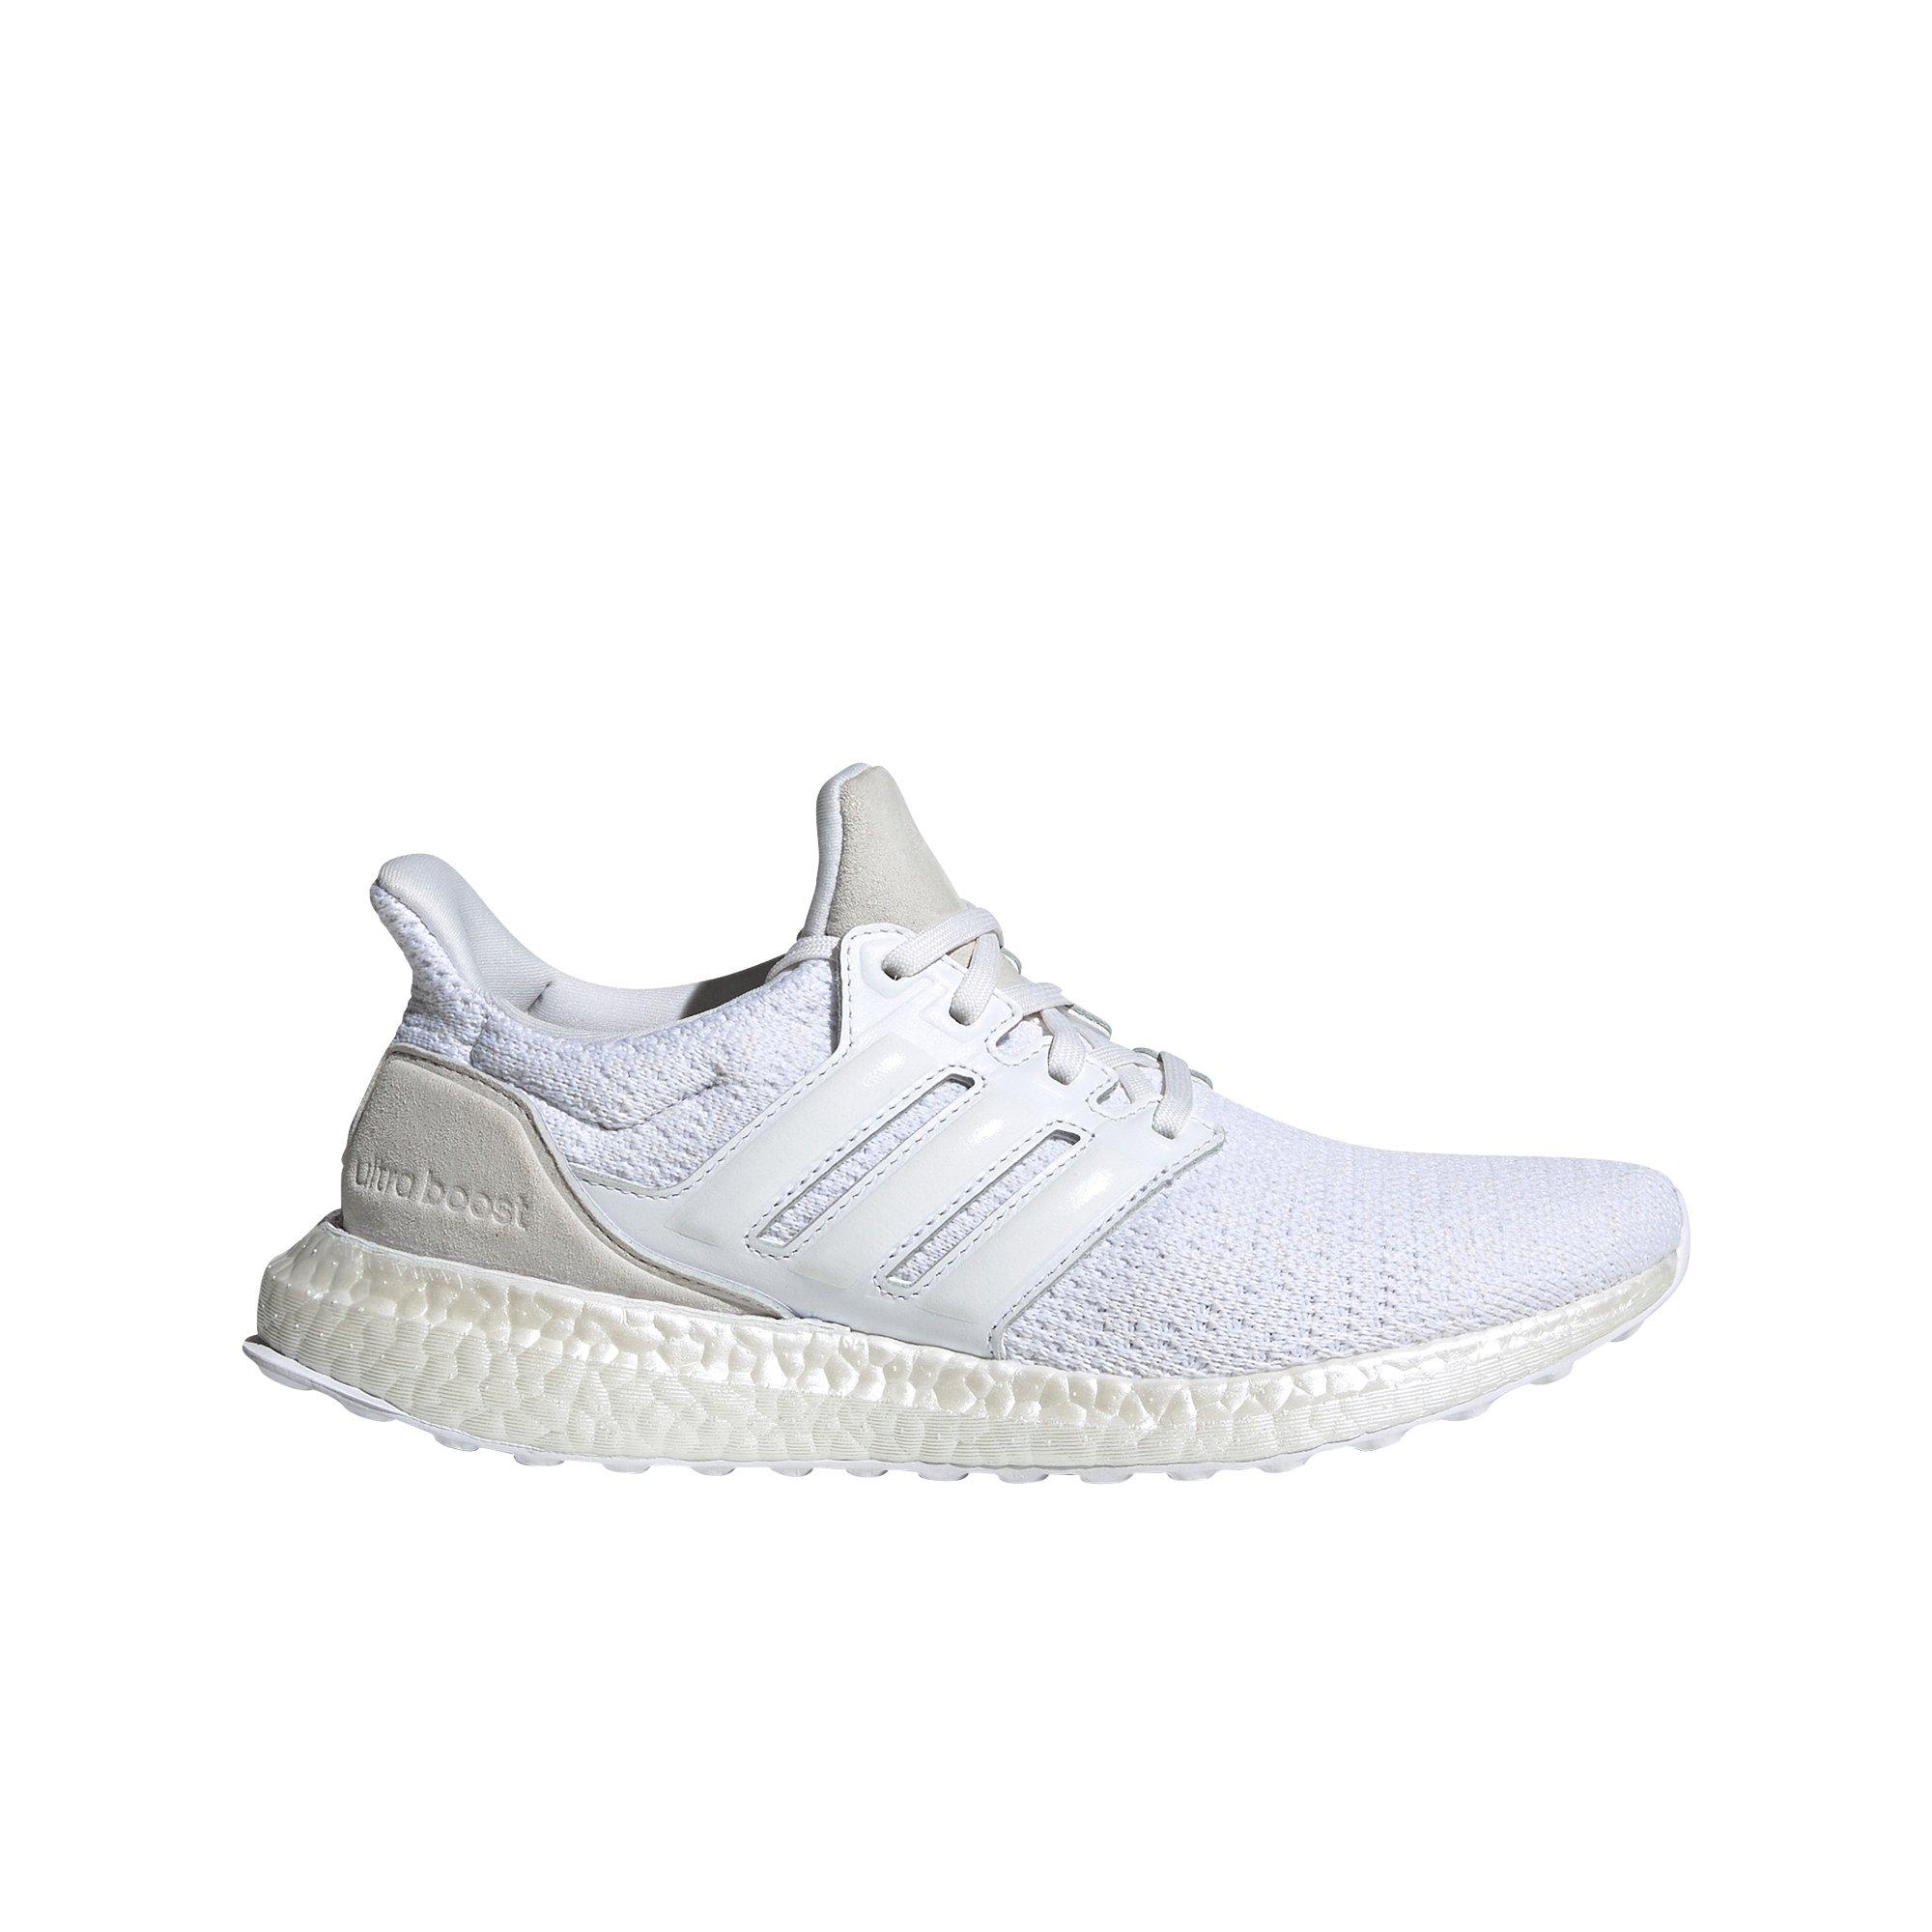 ultraboost dna shoes womens